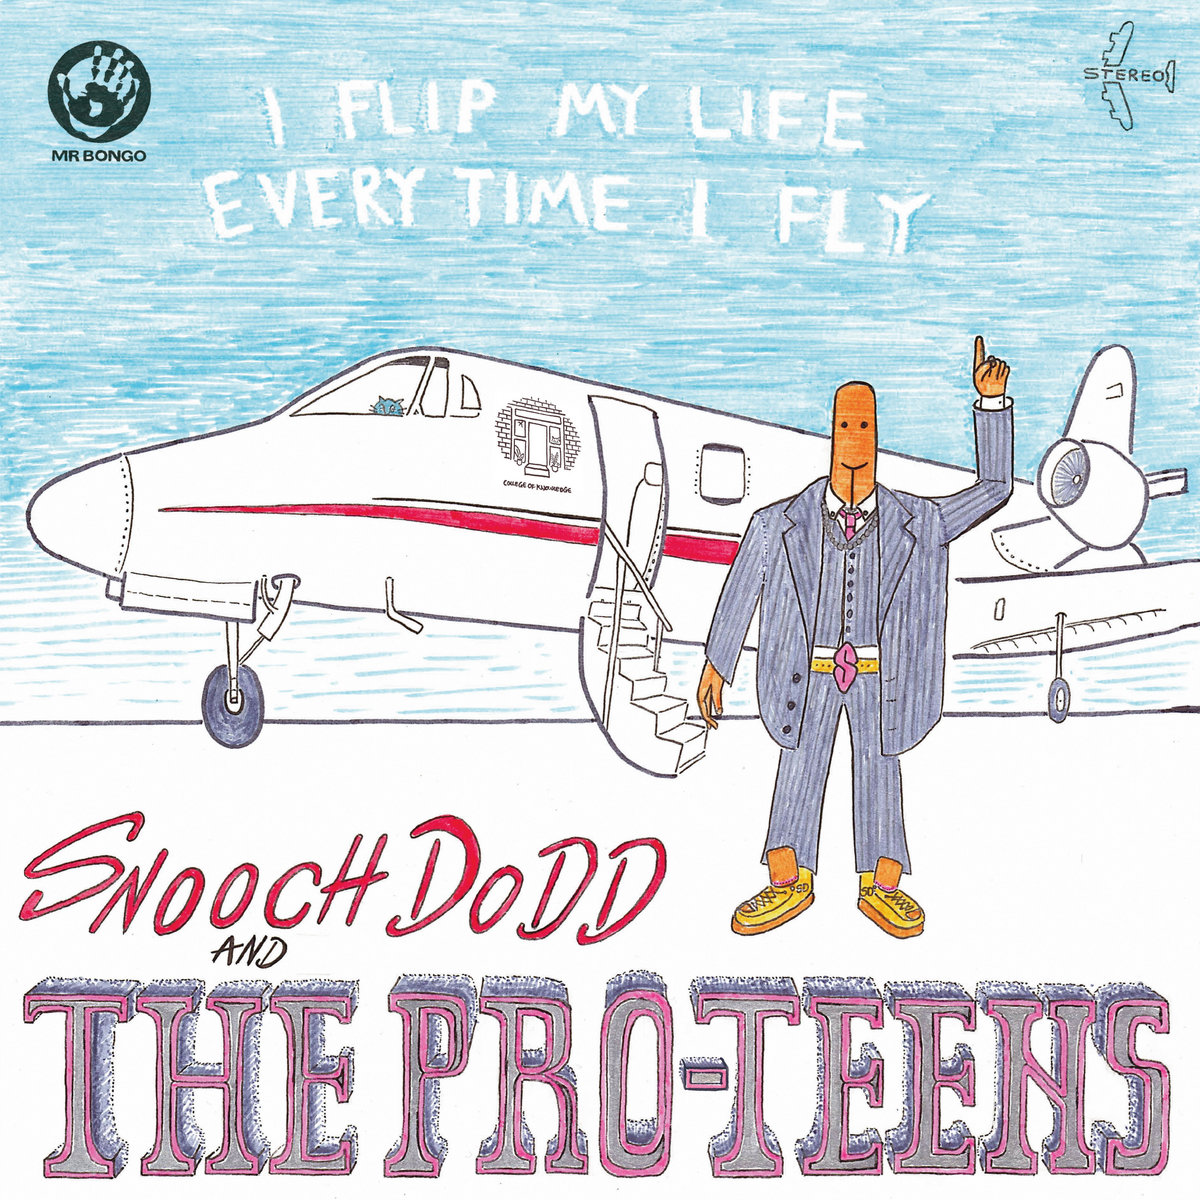 SNOOCH DODD AND THE PRO TEENS - I FLIP MY LIFE EVERY TIME I FLY - LP